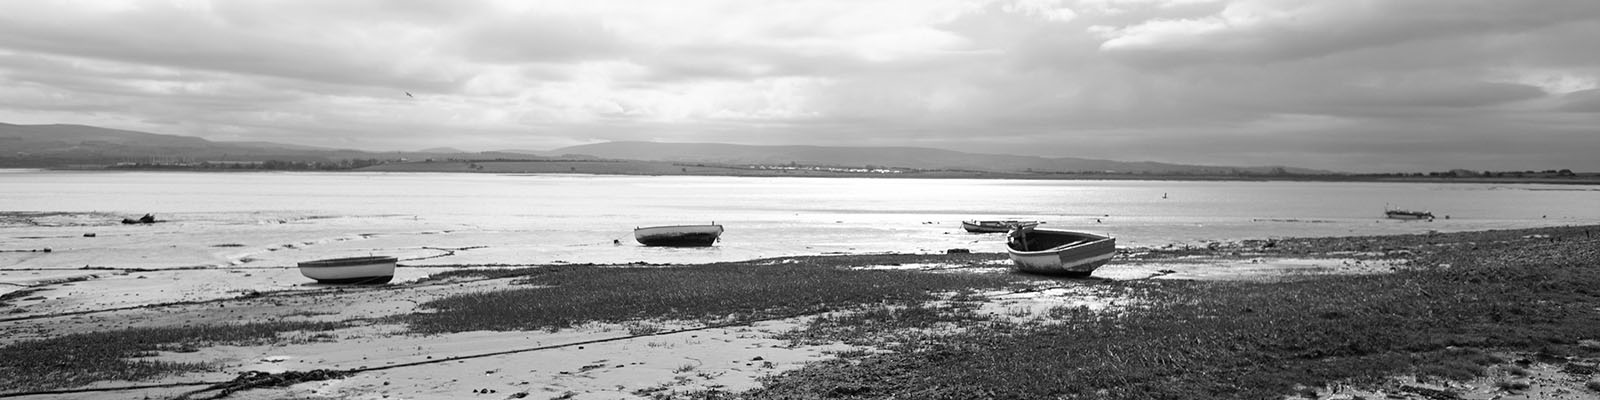 Looking out across Morecambe Bay from Sunderland Point. Black and white photo.